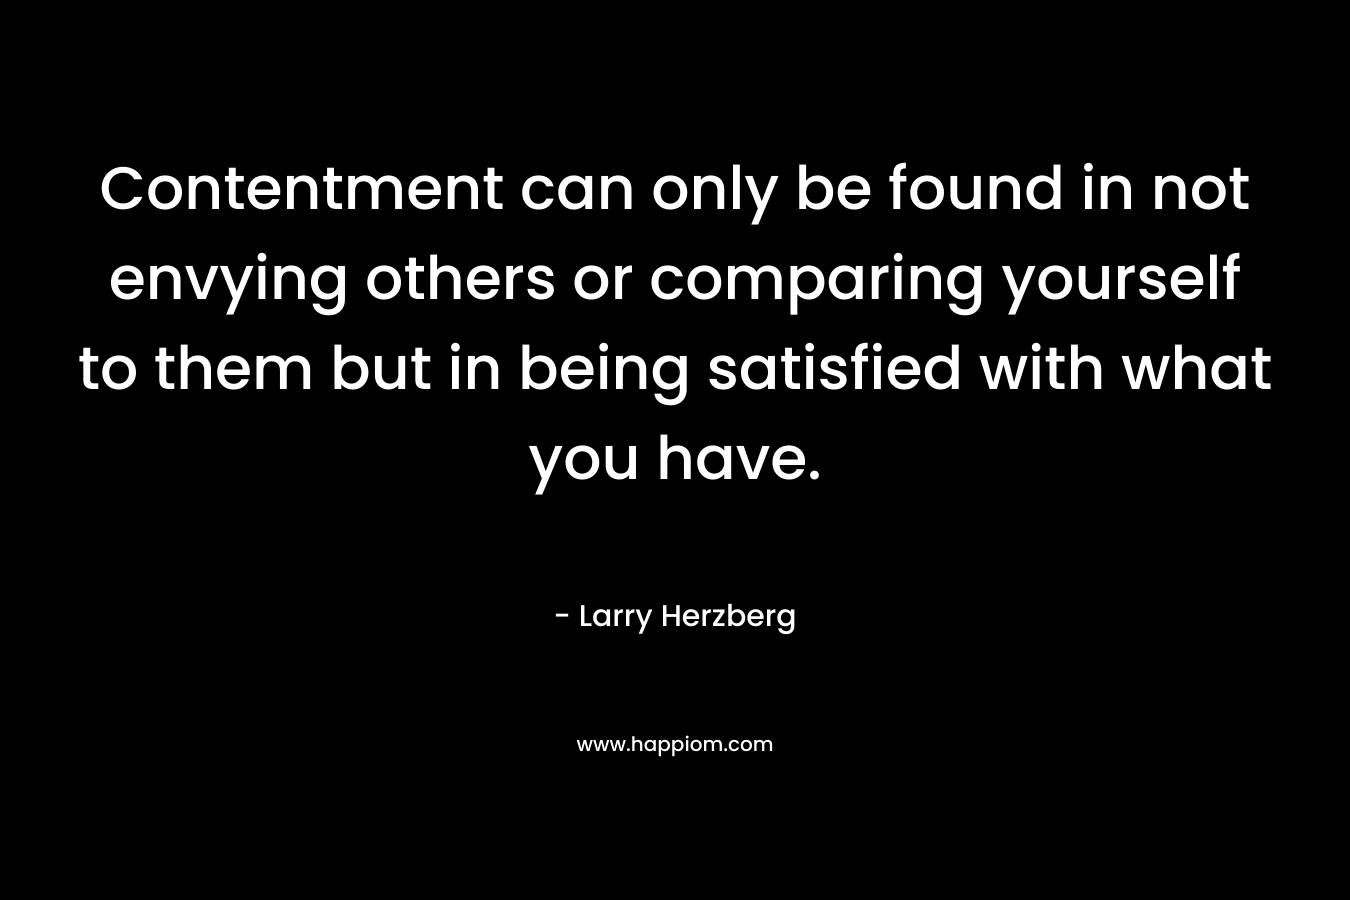 Contentment can only be found in not envying others or comparing yourself to them but in being satisfied with what you have.